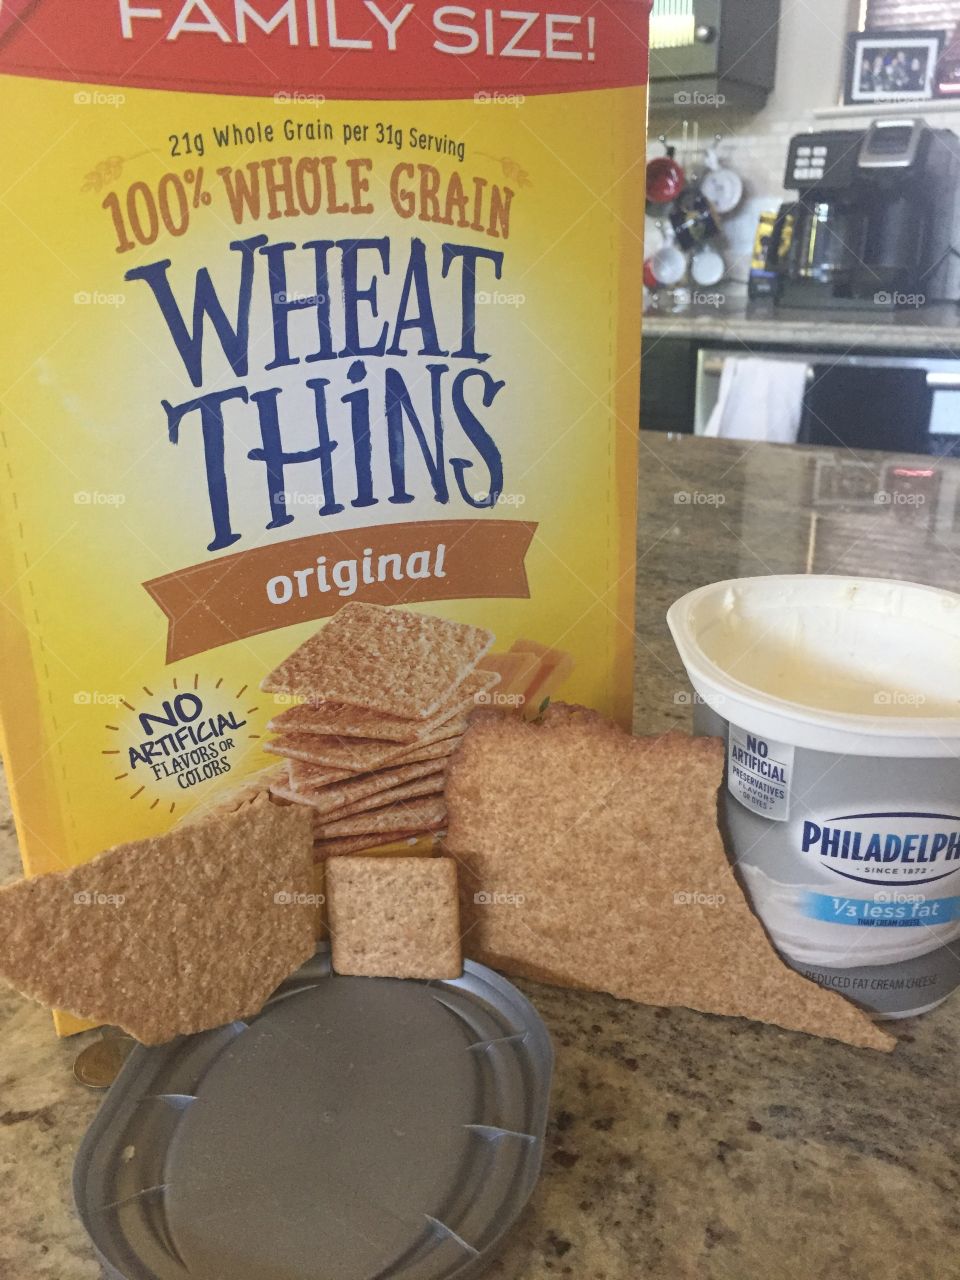 Most deformed wheat thins next to a normal wheat thin